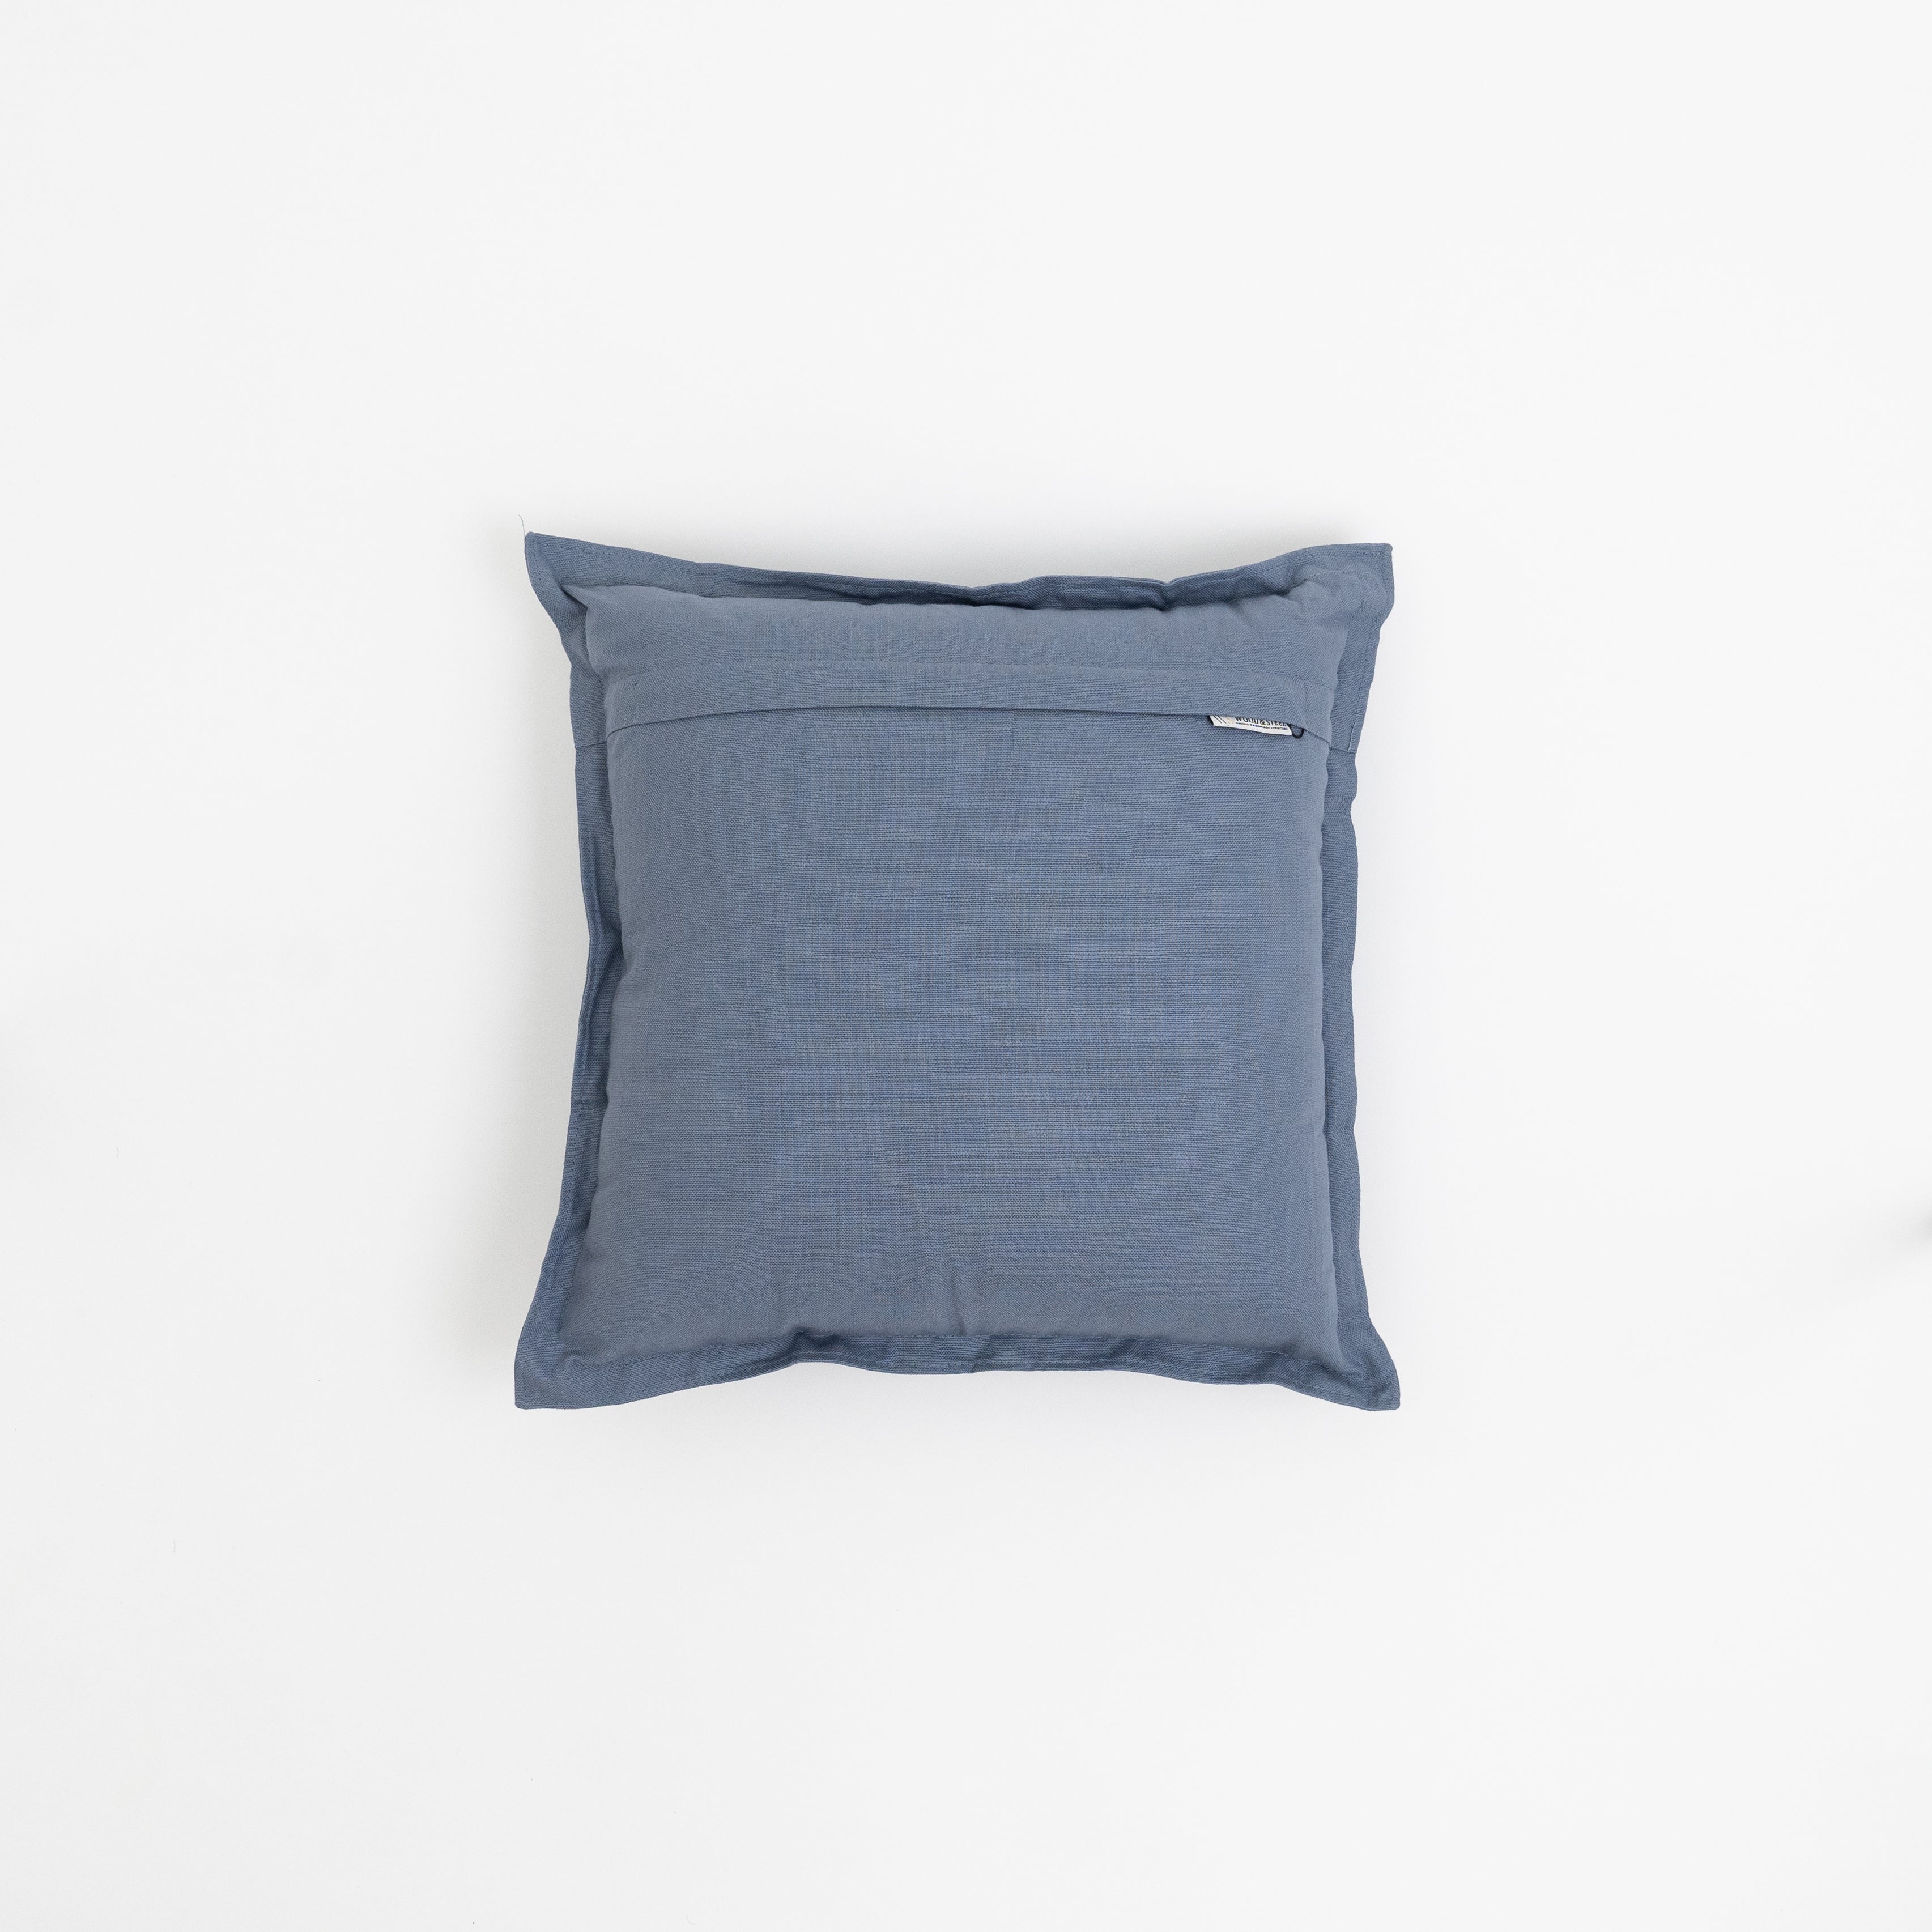 Cushion Cover Blue 45 x45cm - Wood and Steel Furnitures